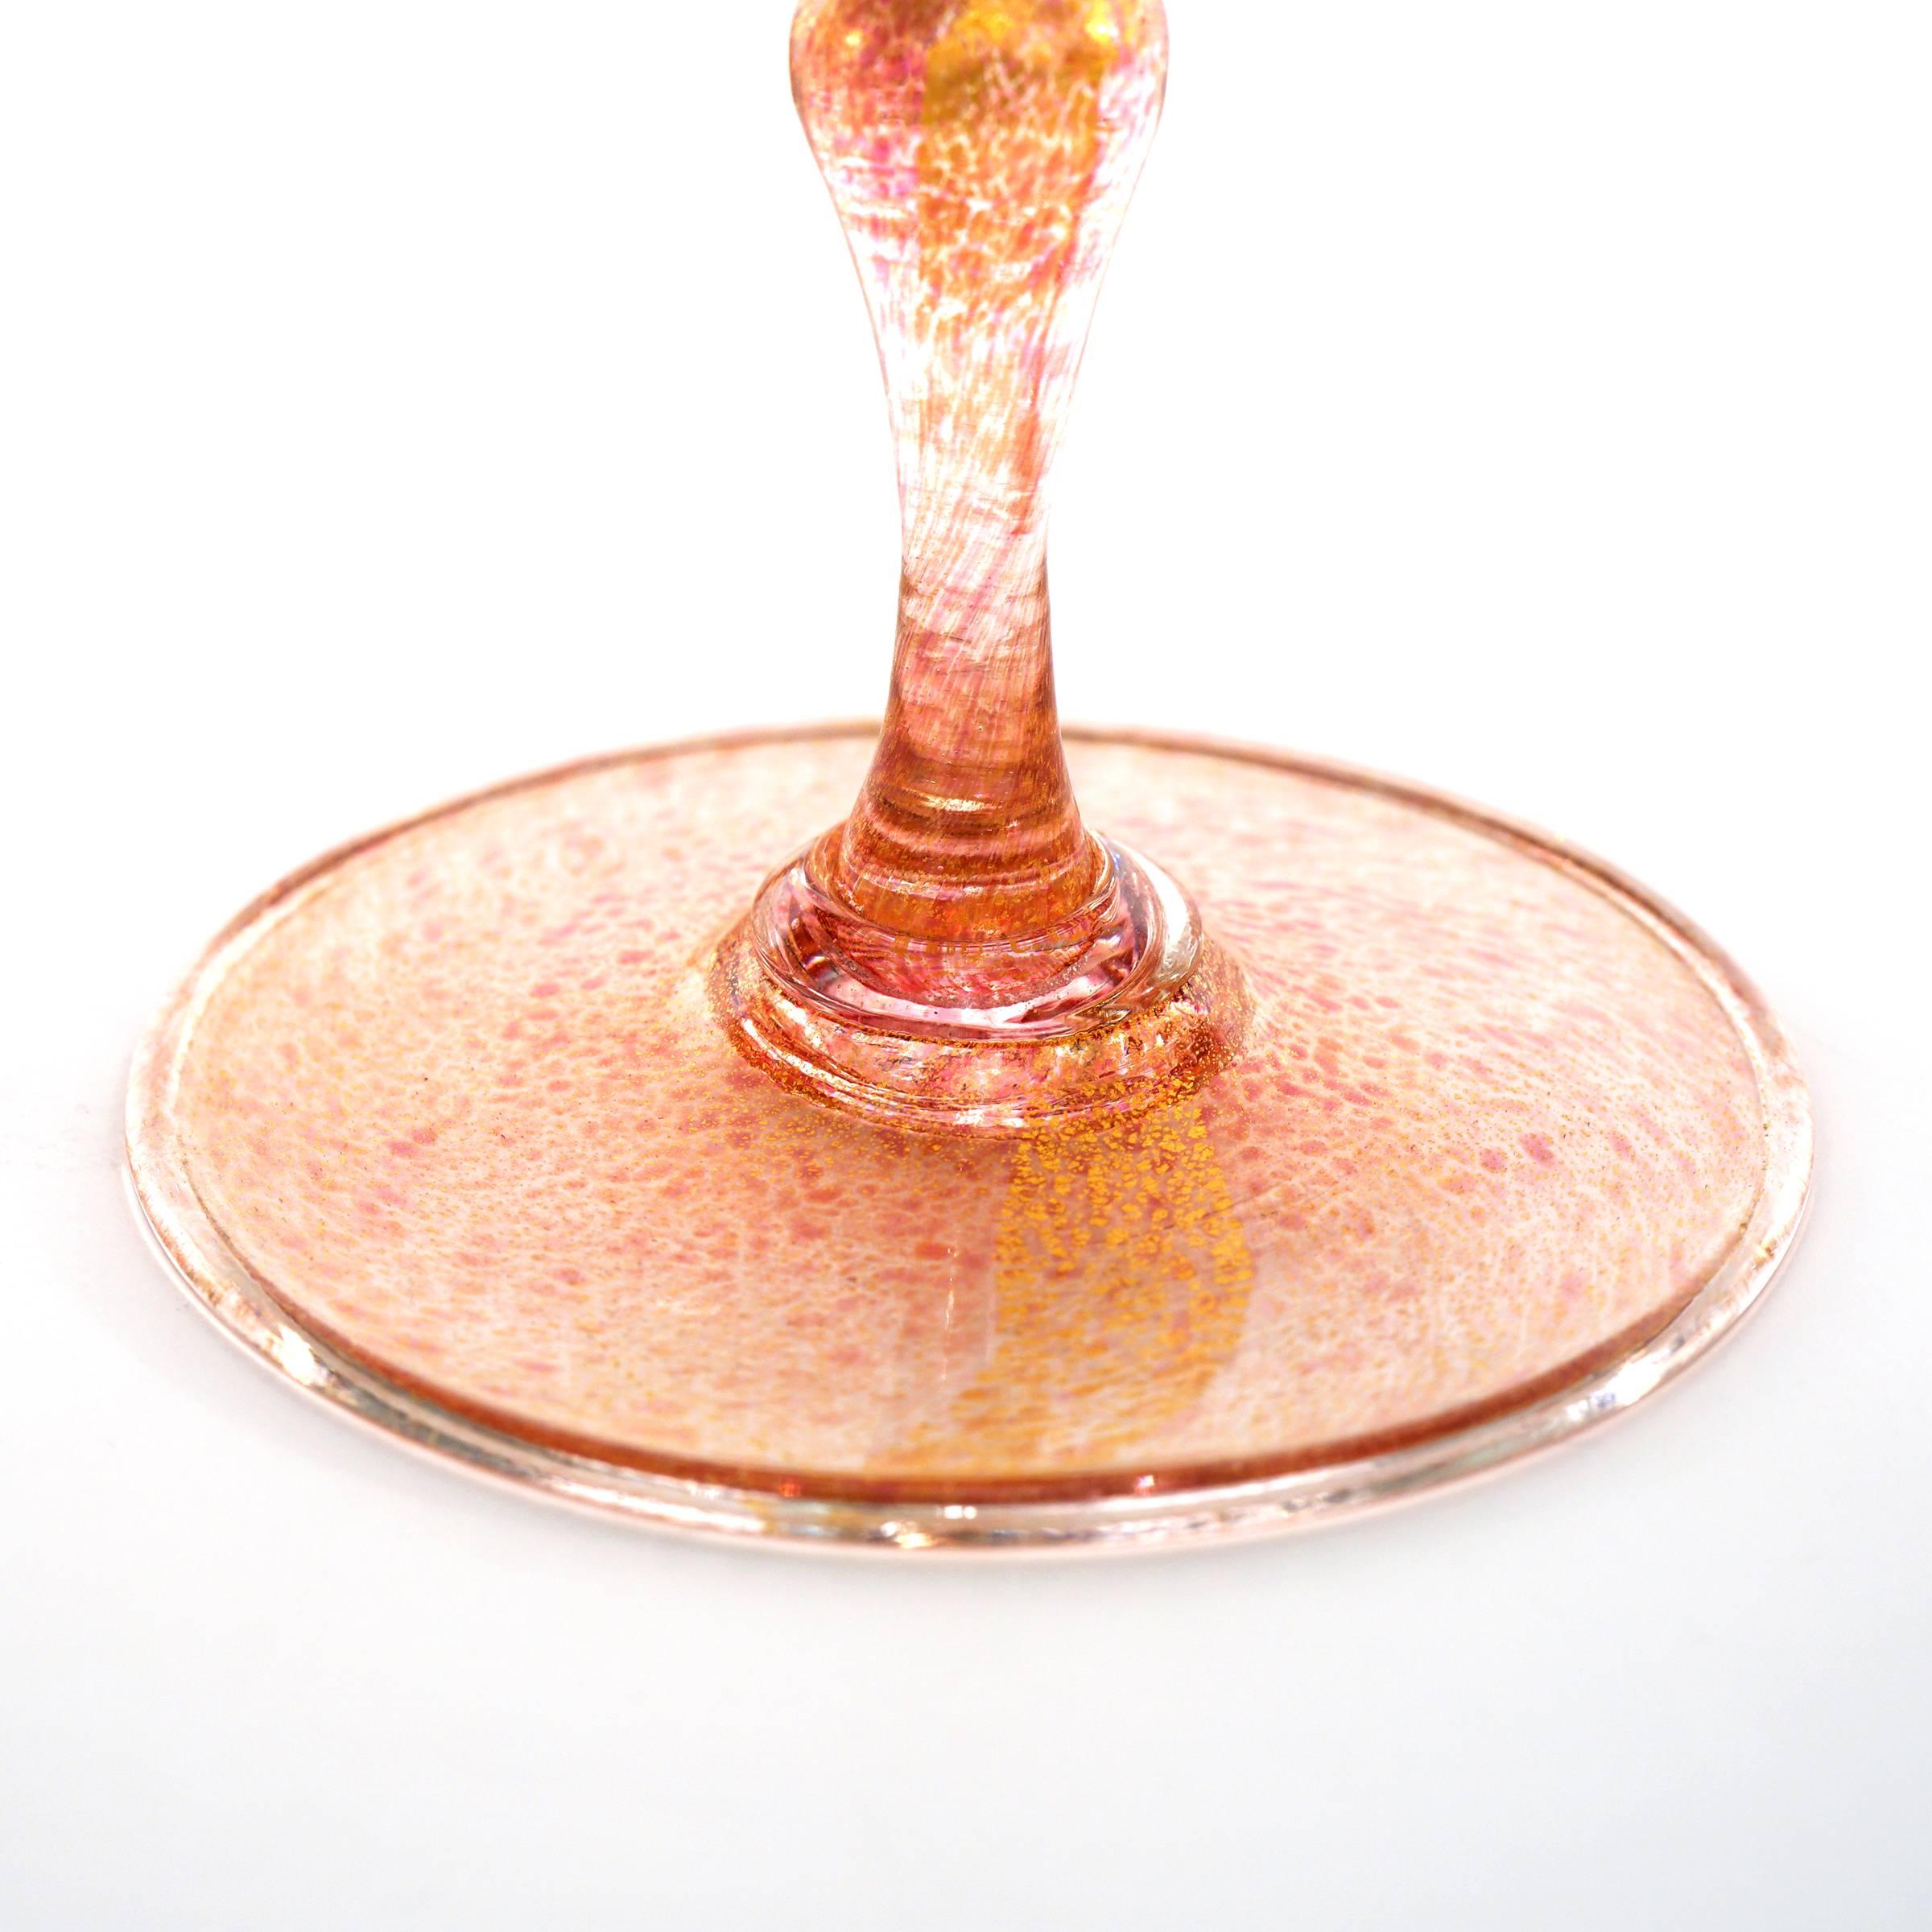 Early 20th Century 16 Art Deco Gold Flecked Pink Venetian Goblets, circa 1920s by Salviati